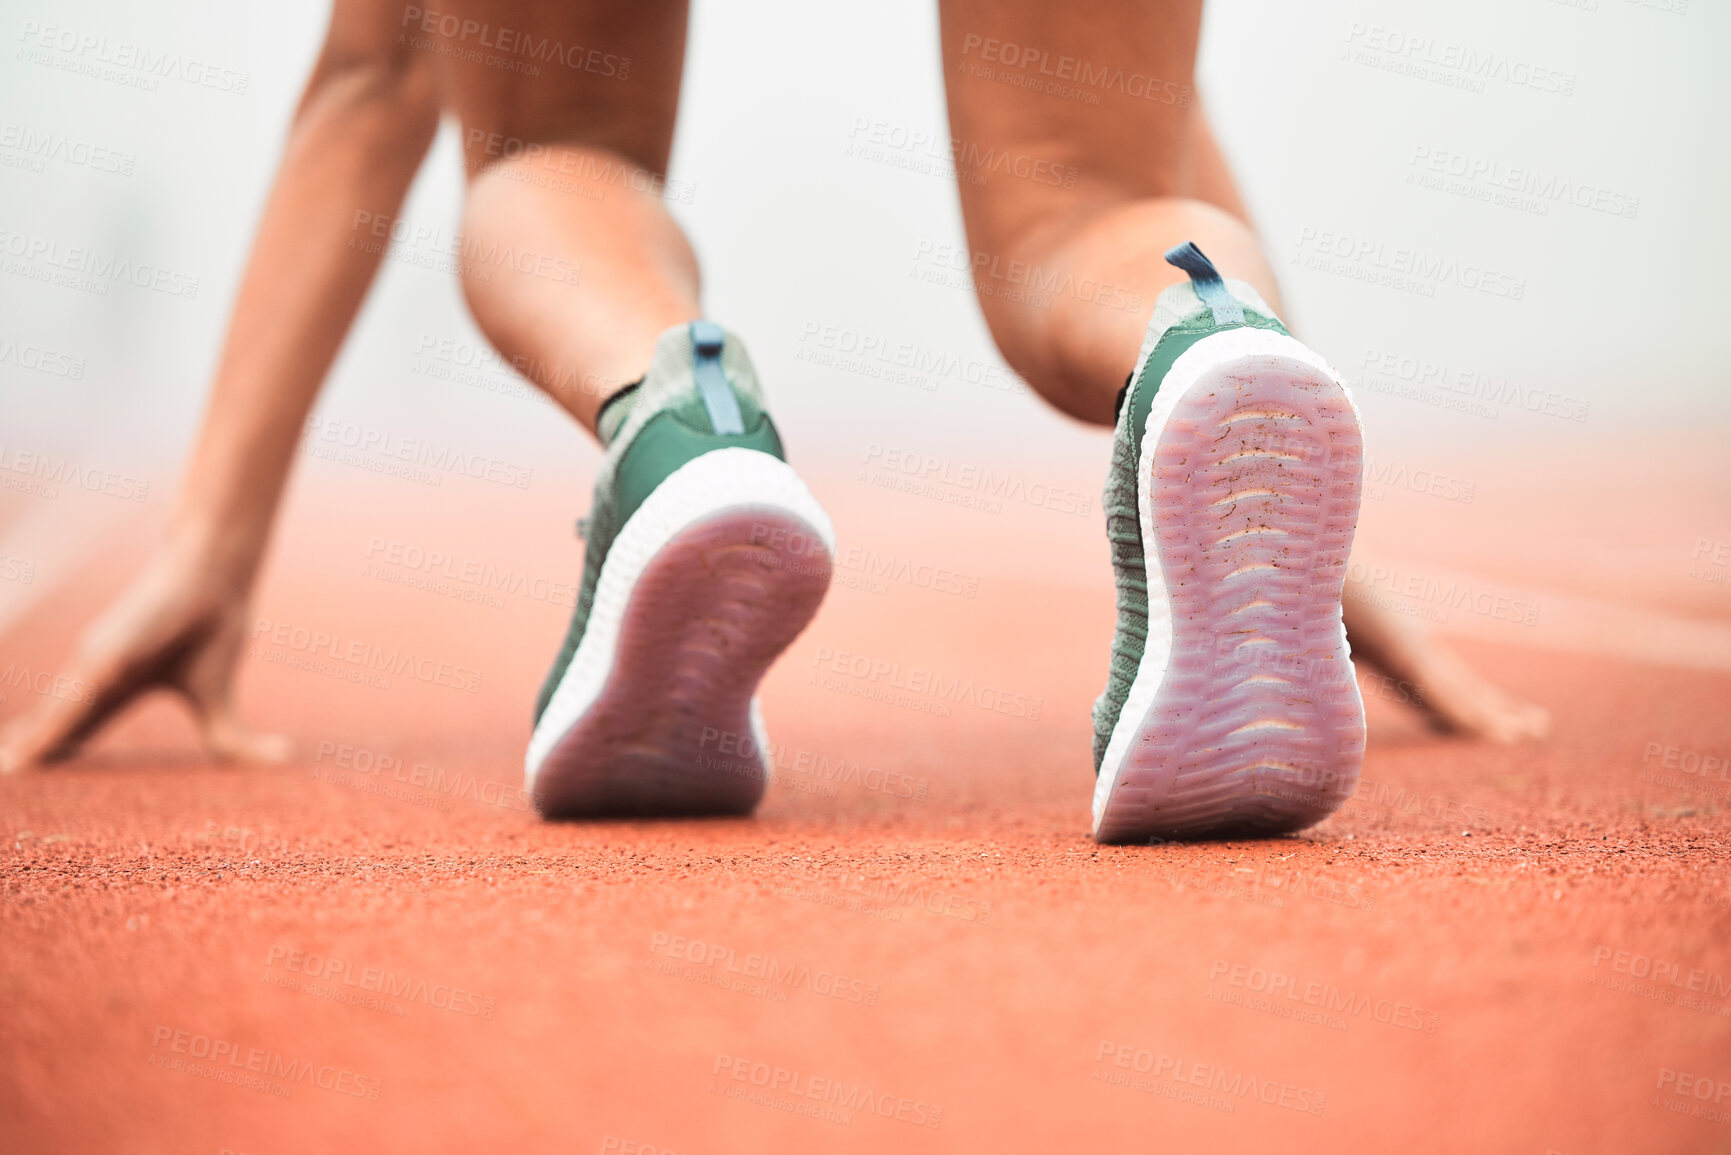 Buy stock photo Rearview shot of an unrecognizable young sportswoman taking her mark on a running track